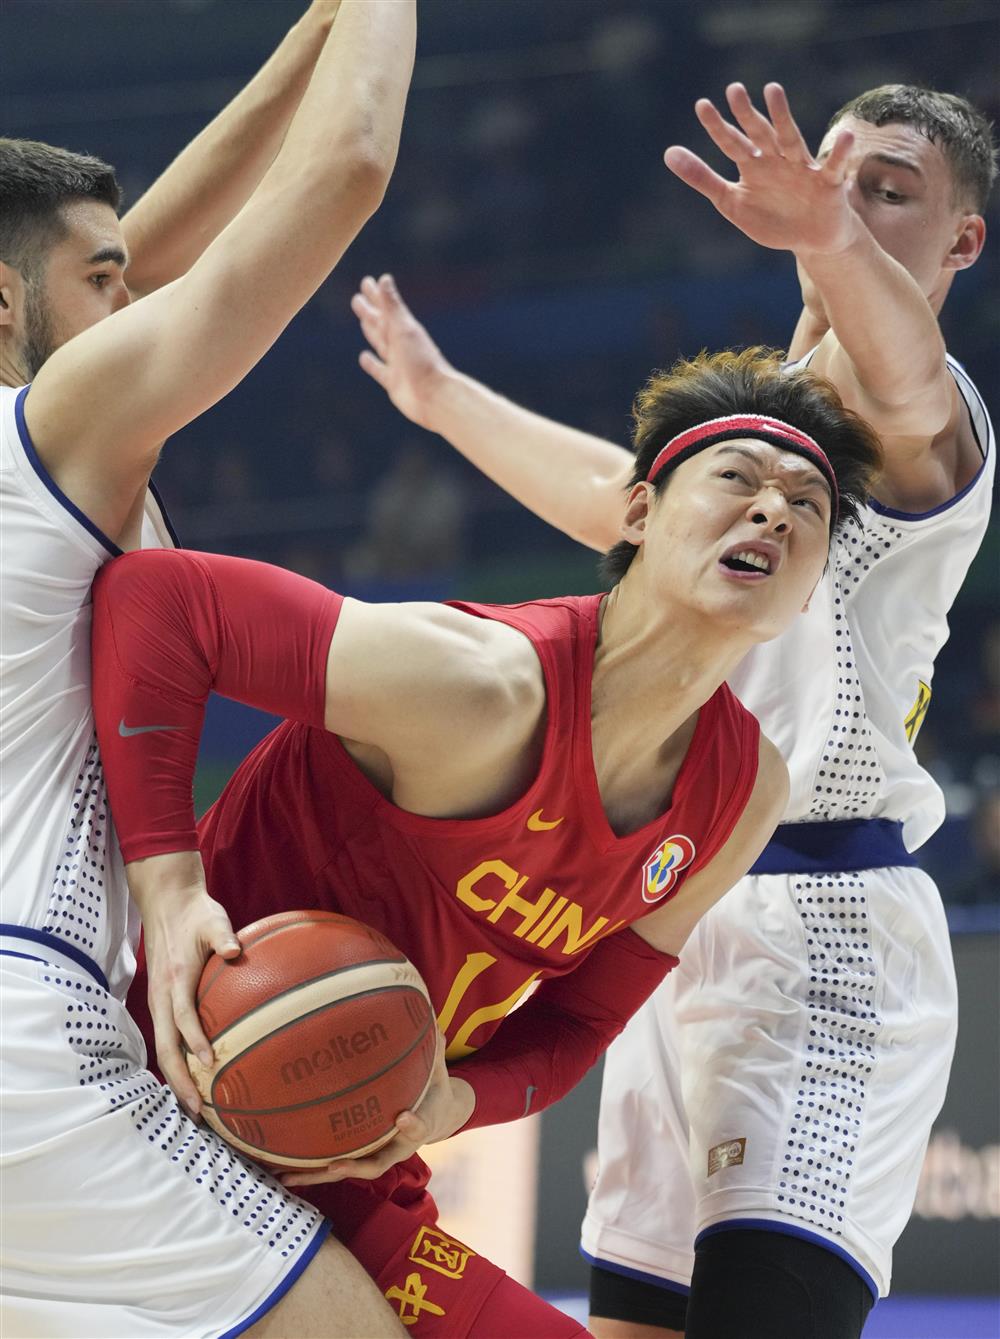 What caused Likel to suffer from "competition syndrome"?, China's men's basketball team suffered a disastrous defeat in the first game of the World Cup | South Sudan | suffering from